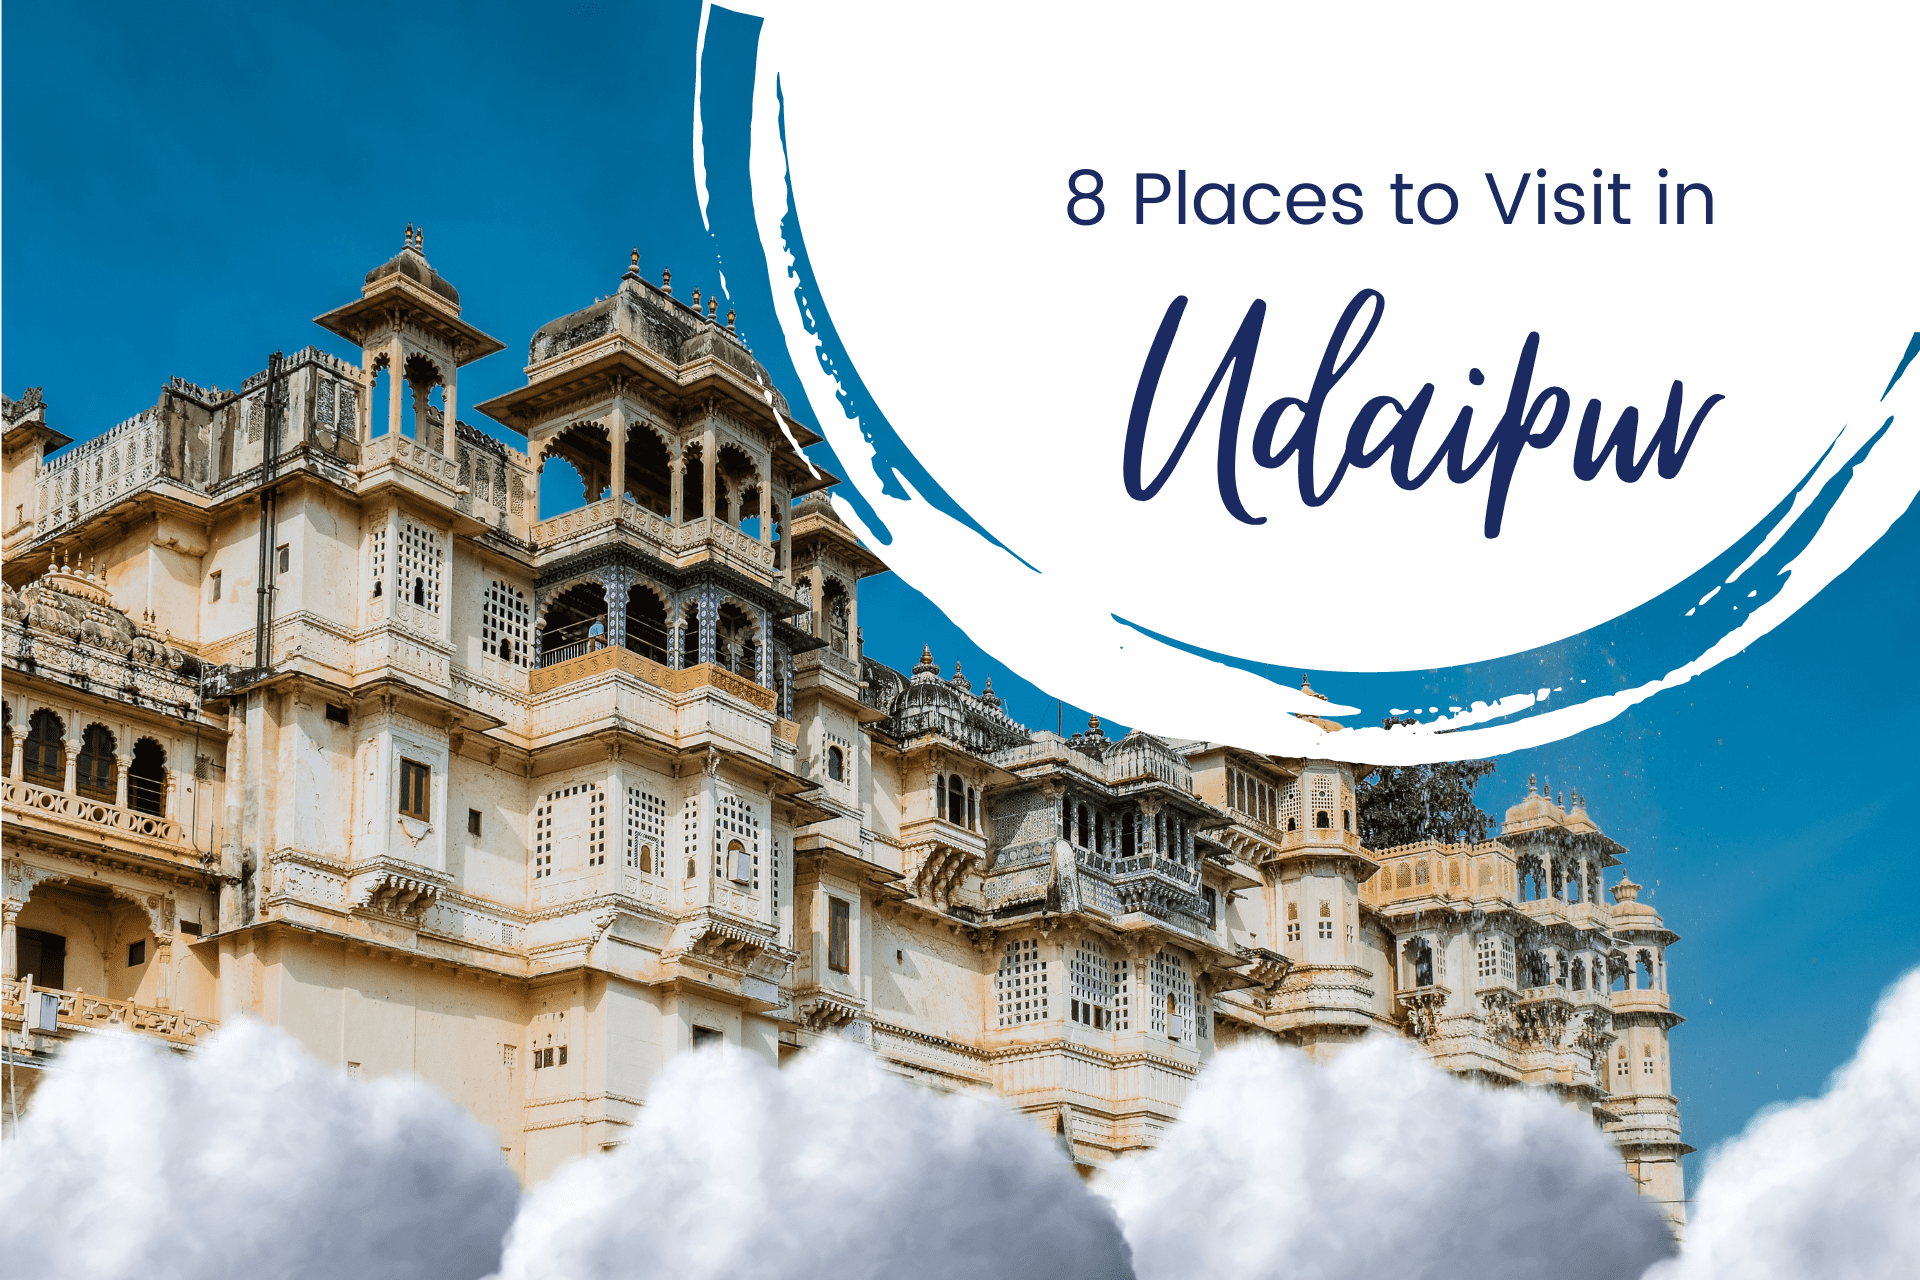 8 Amazing Places to Visit in Udaipur in 2023